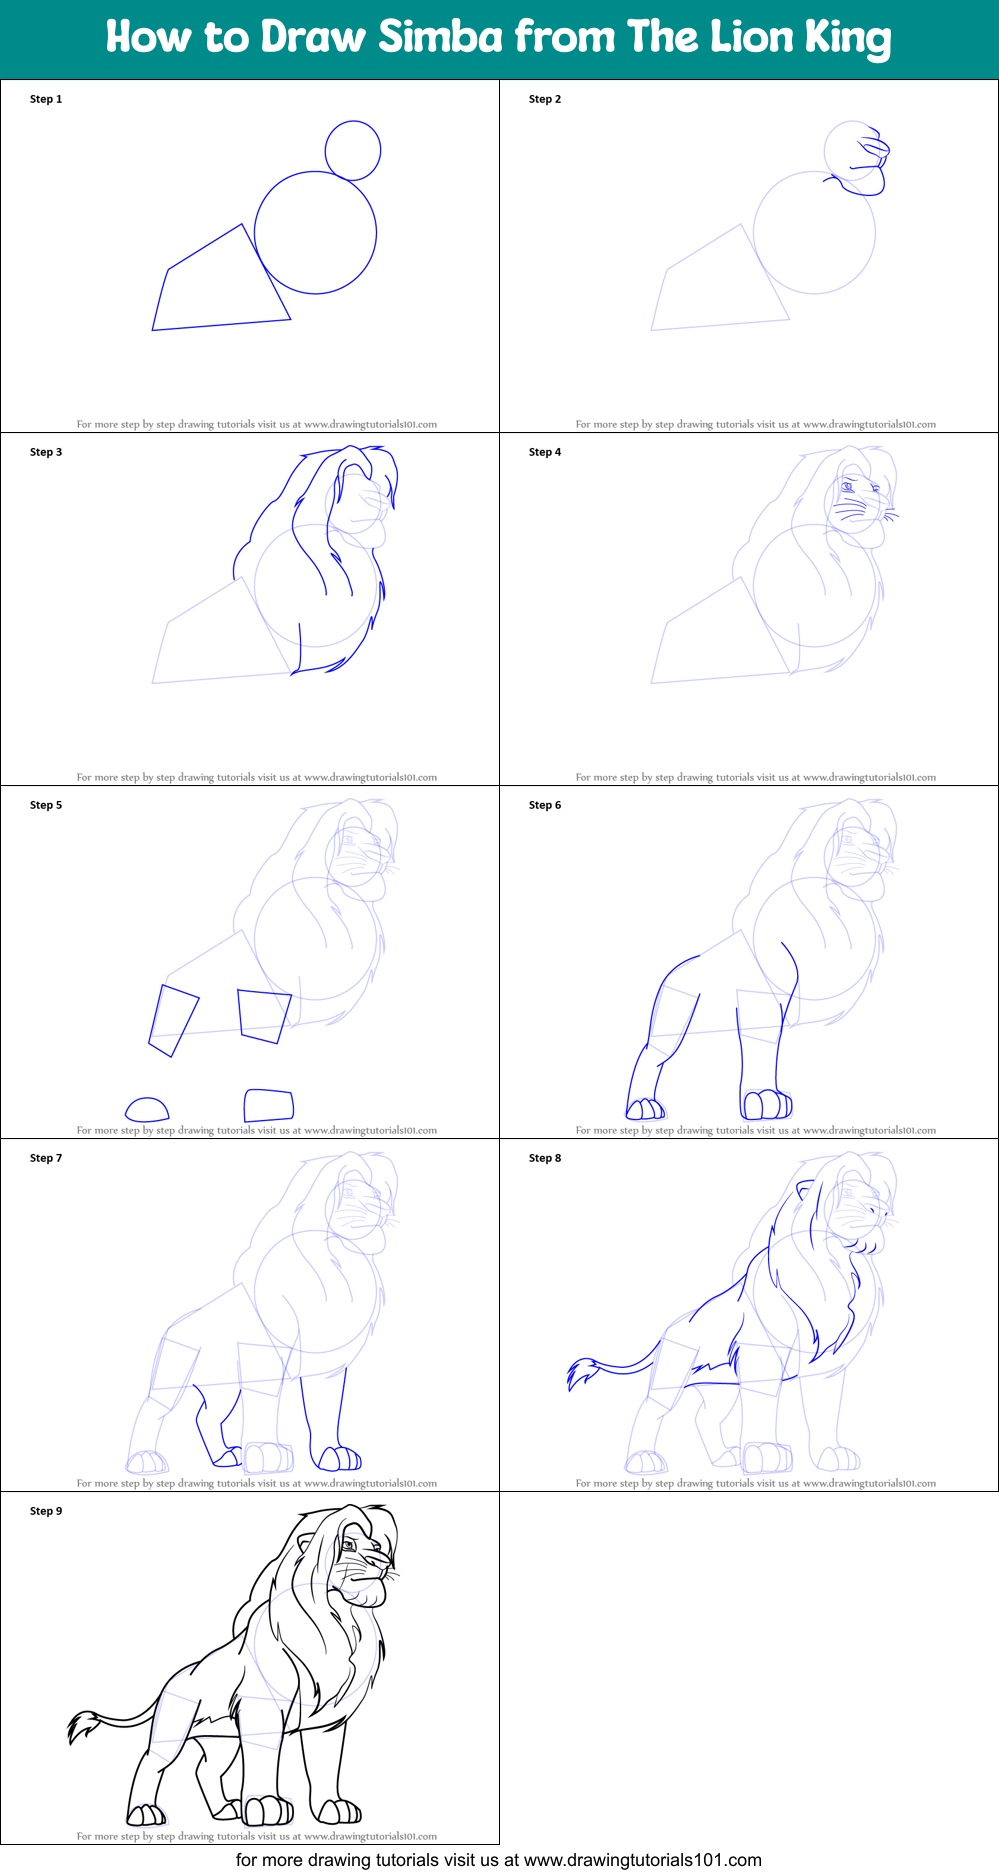 Creative How To Sketch Draw An Easy Simba Instruchans with simple drawing